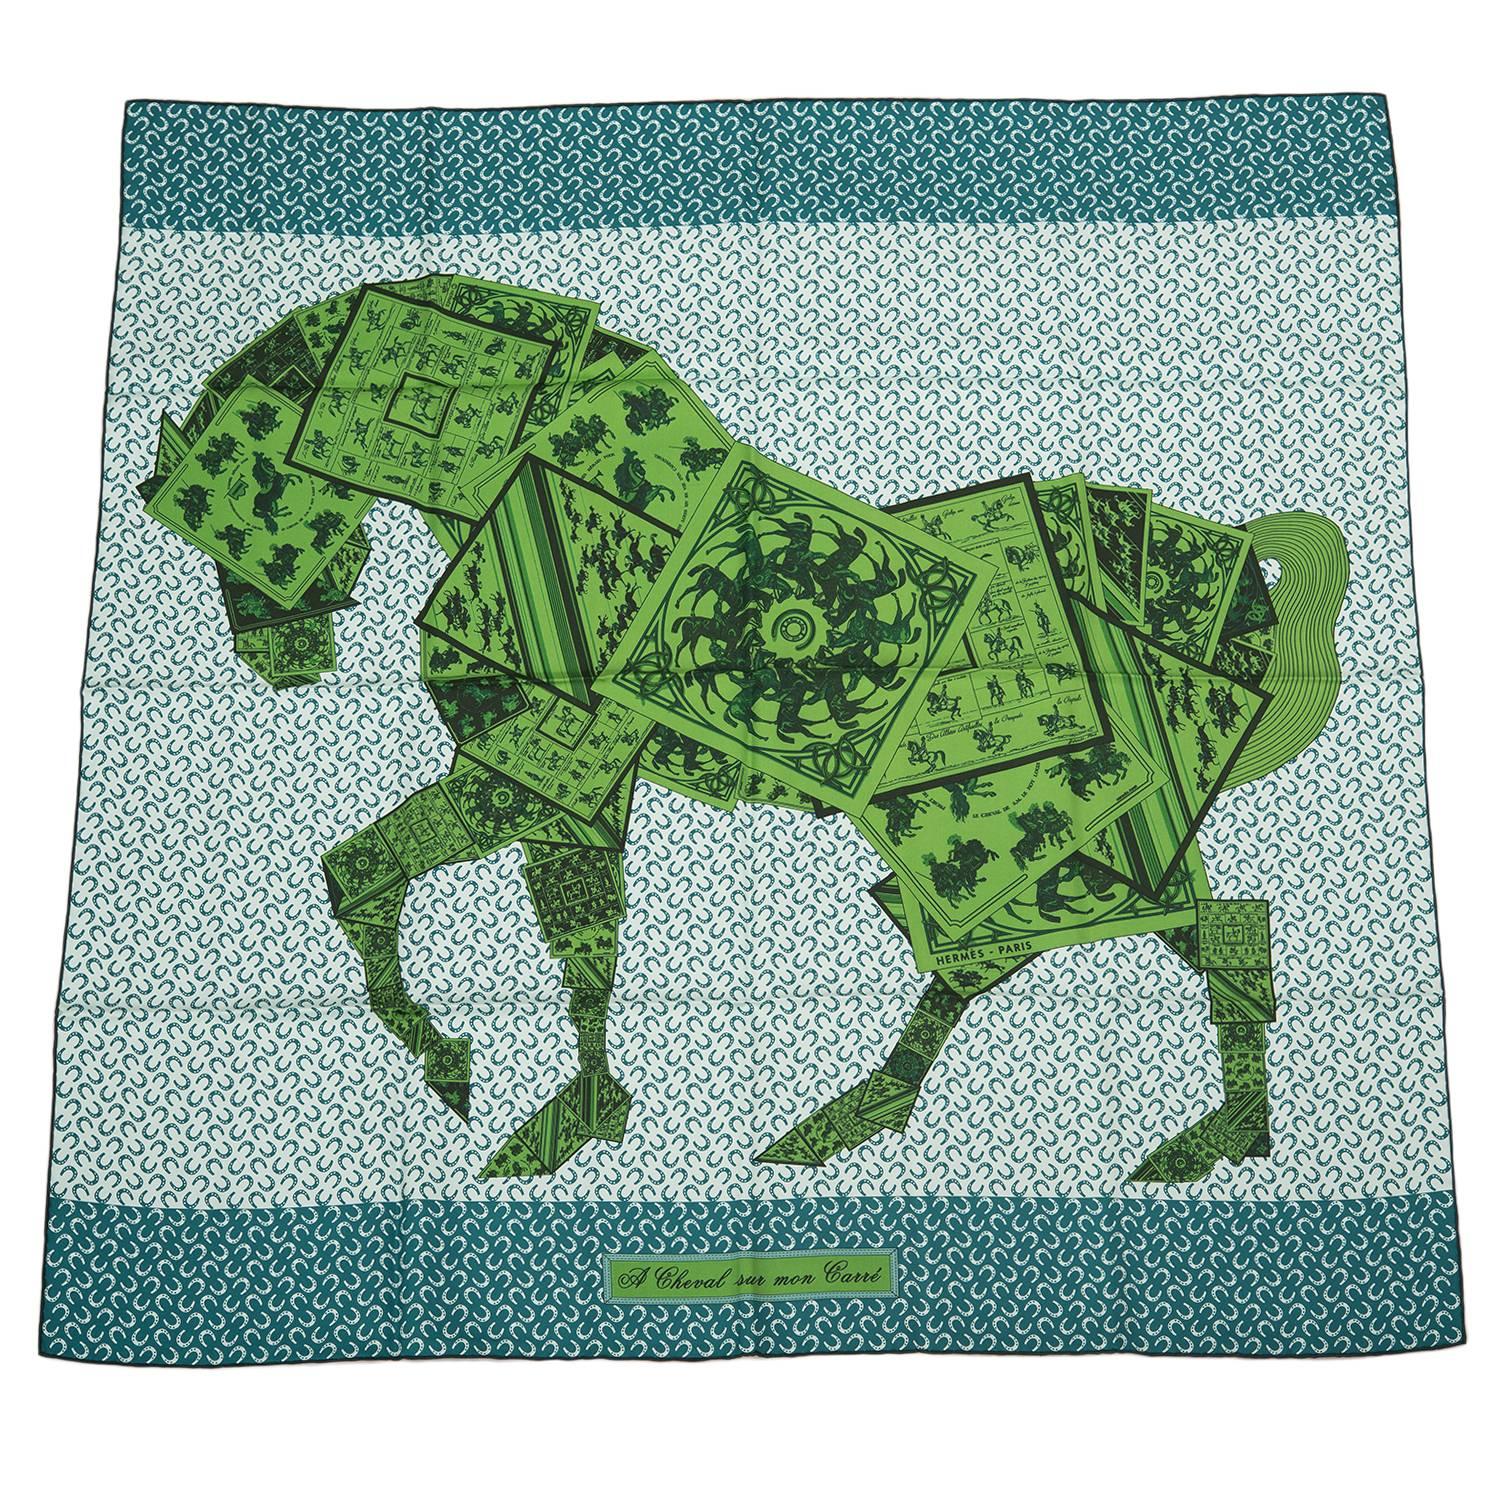 Hermes "A Cheval Sur Mon Carre" Silk Twill Scarf 90cm For Sale